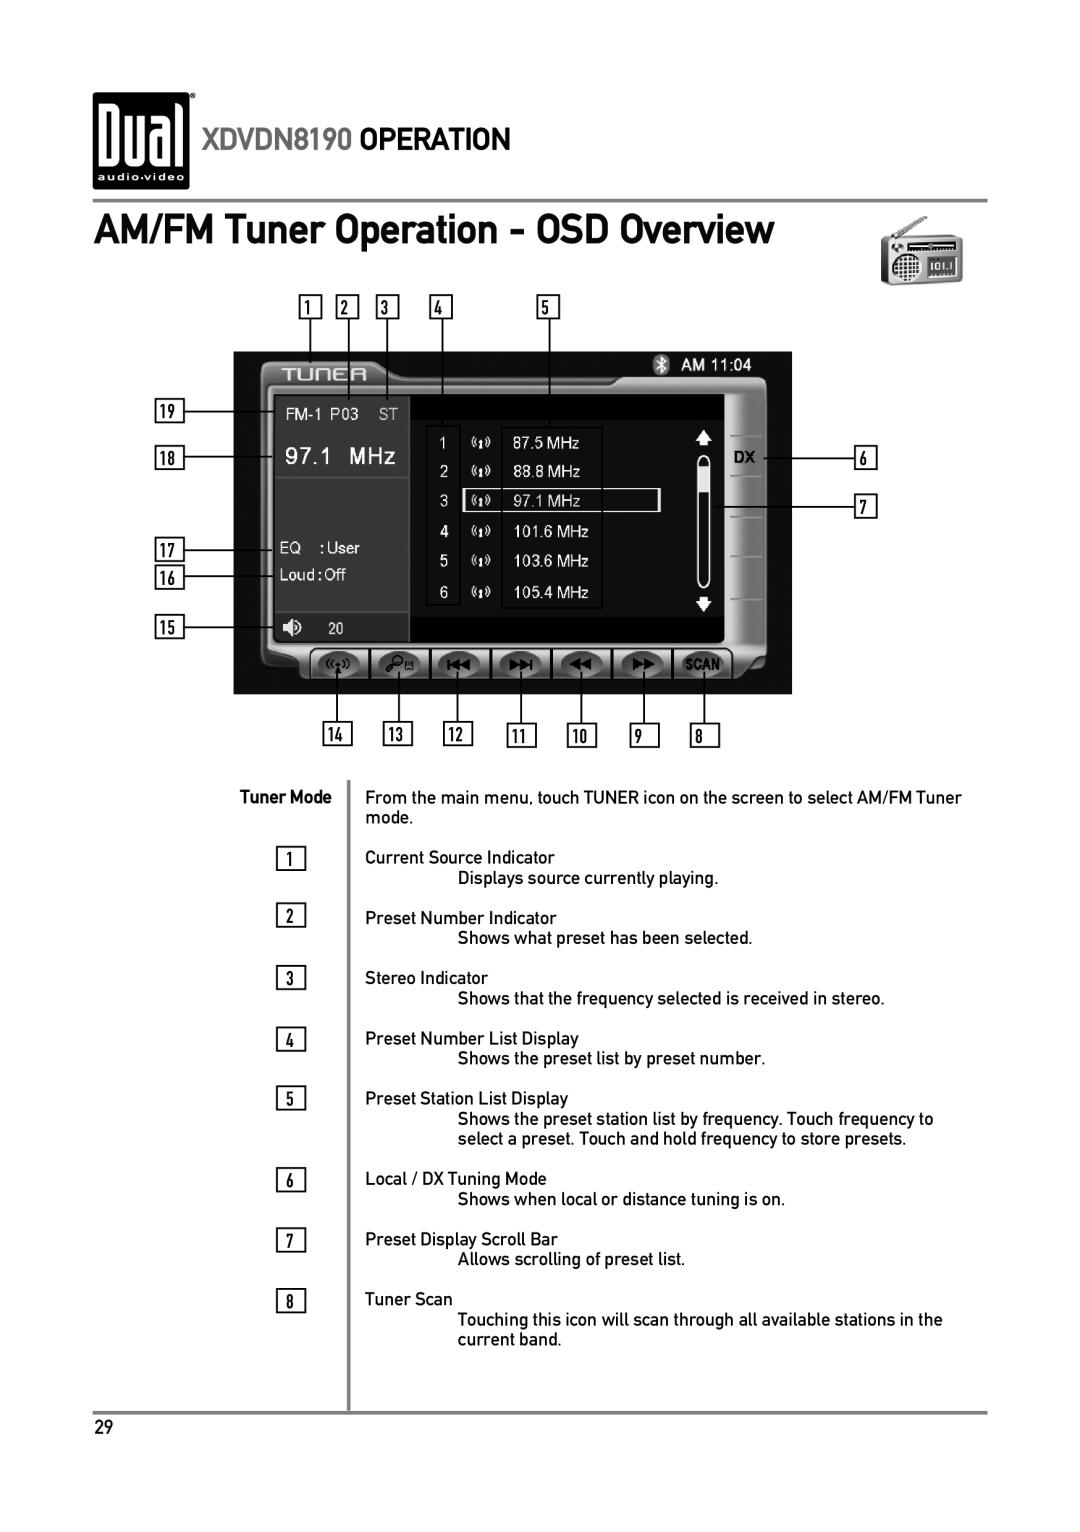 Dual owner manual AM/FM Tuner Operation - OSD Overview, XDVDN8190 OPERATION, Tuner Mode 